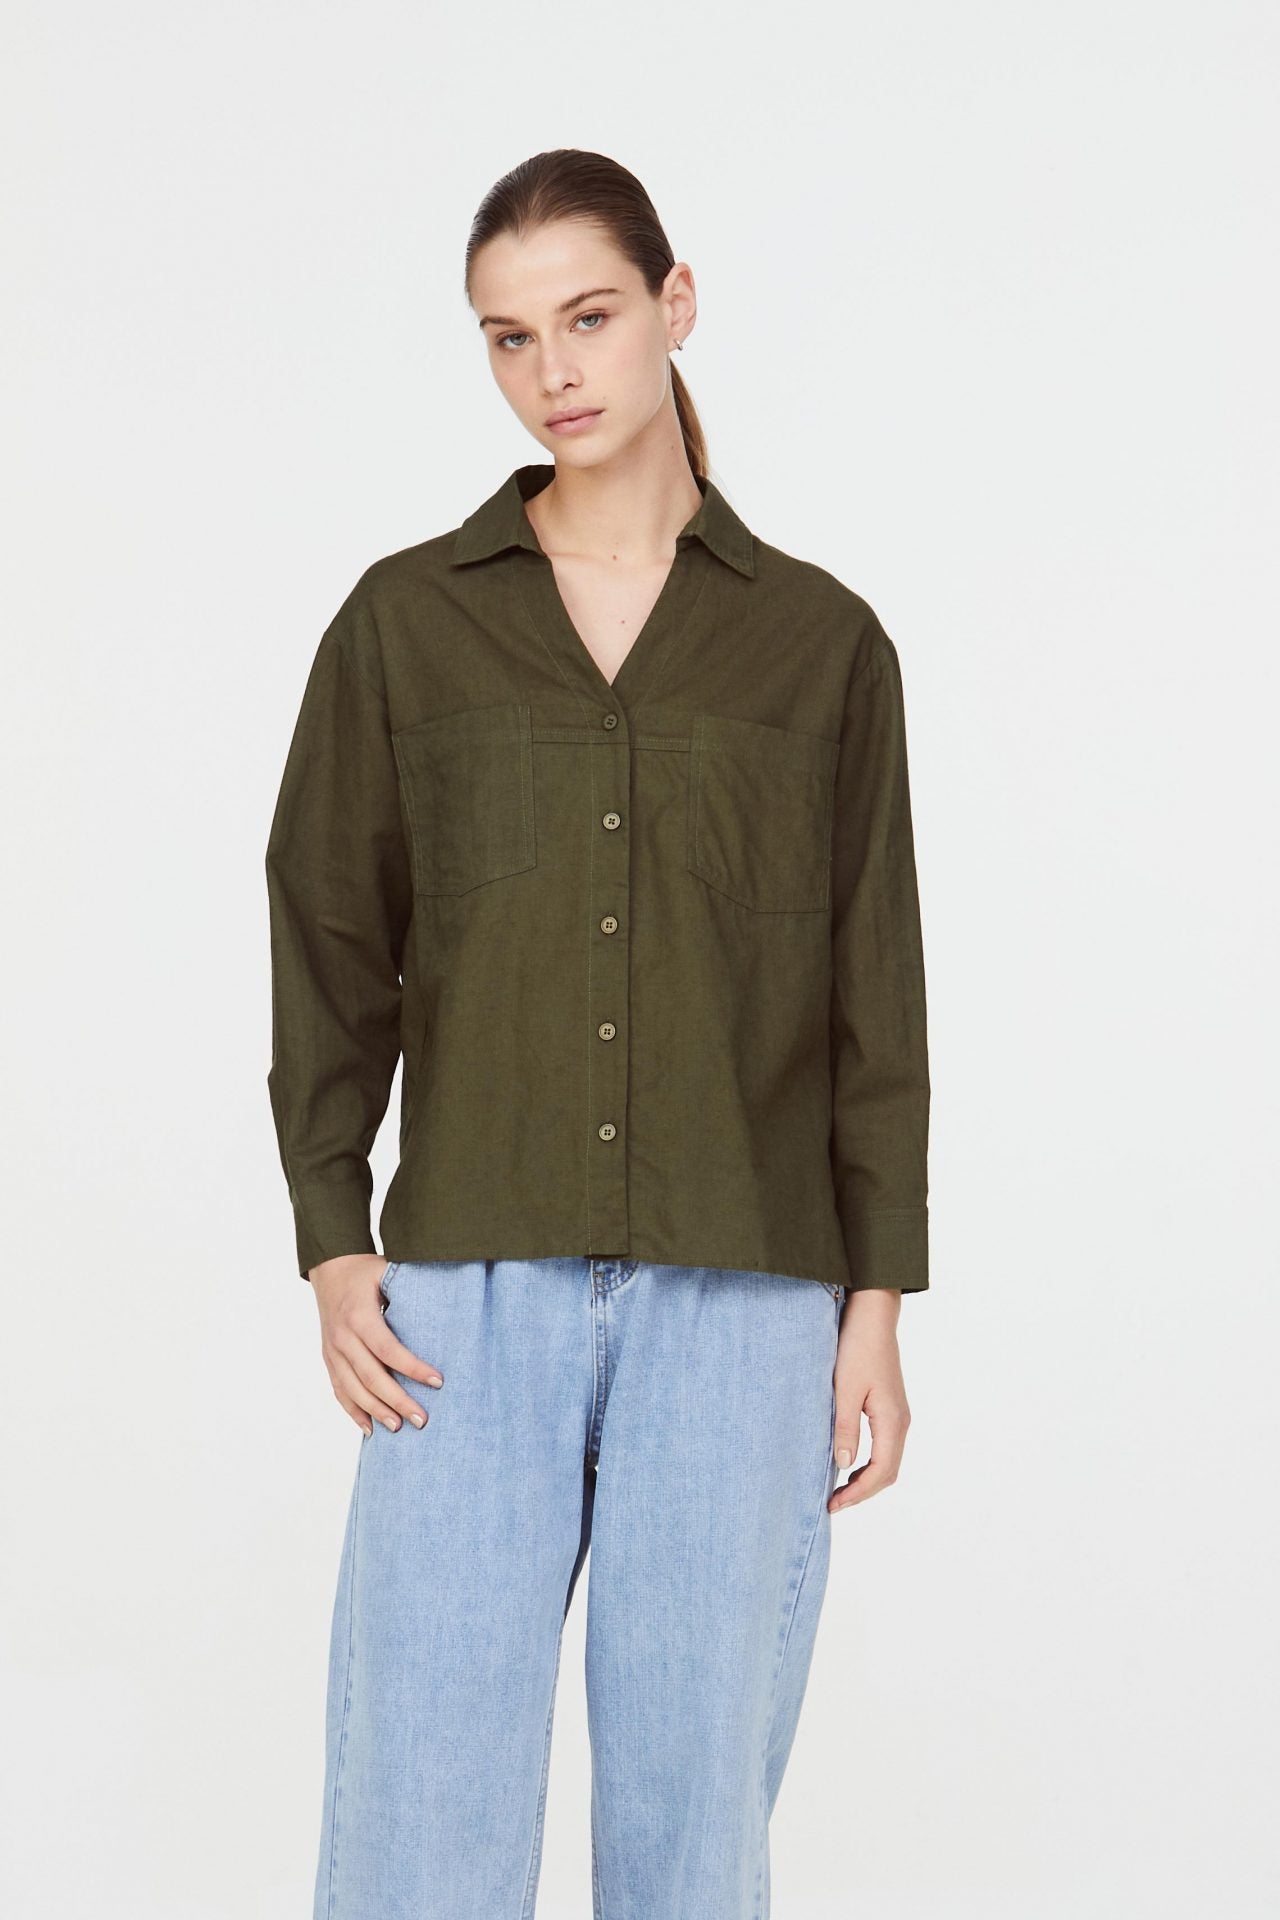 9951 LONG SLEEVE TOP ARMY GREEN